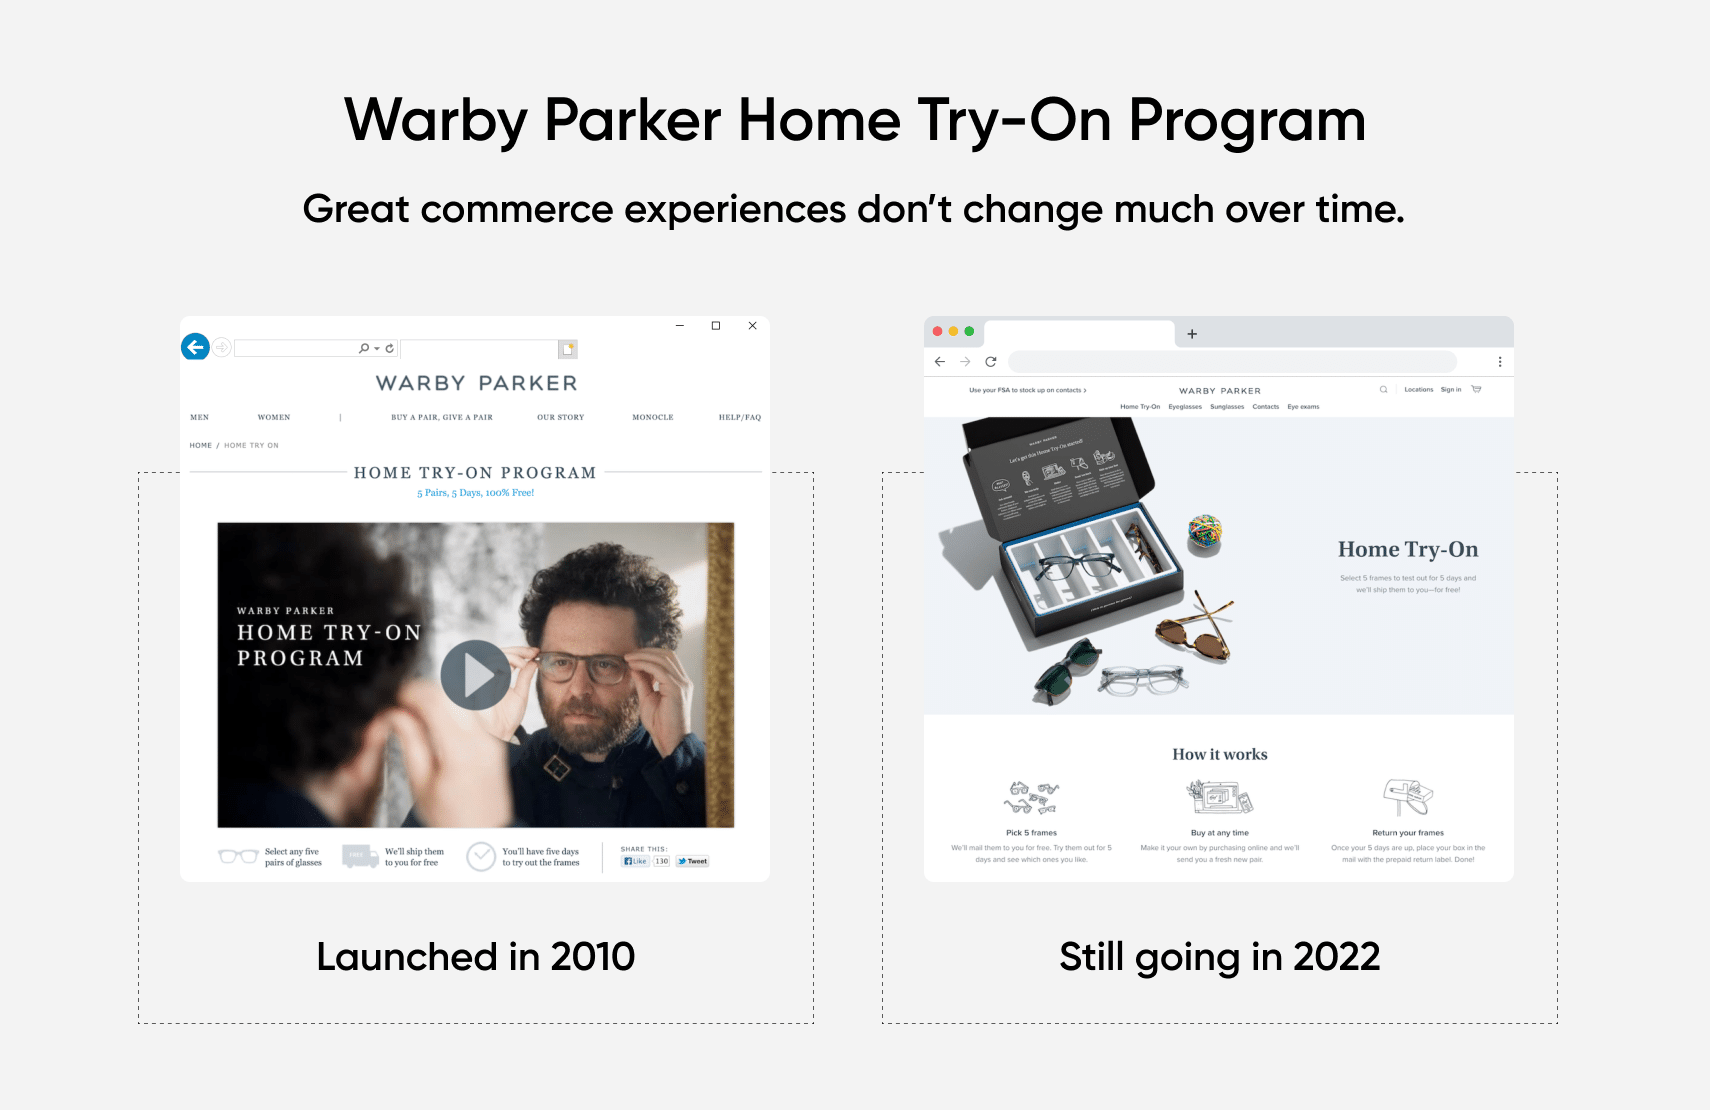 Warby Parker's Home